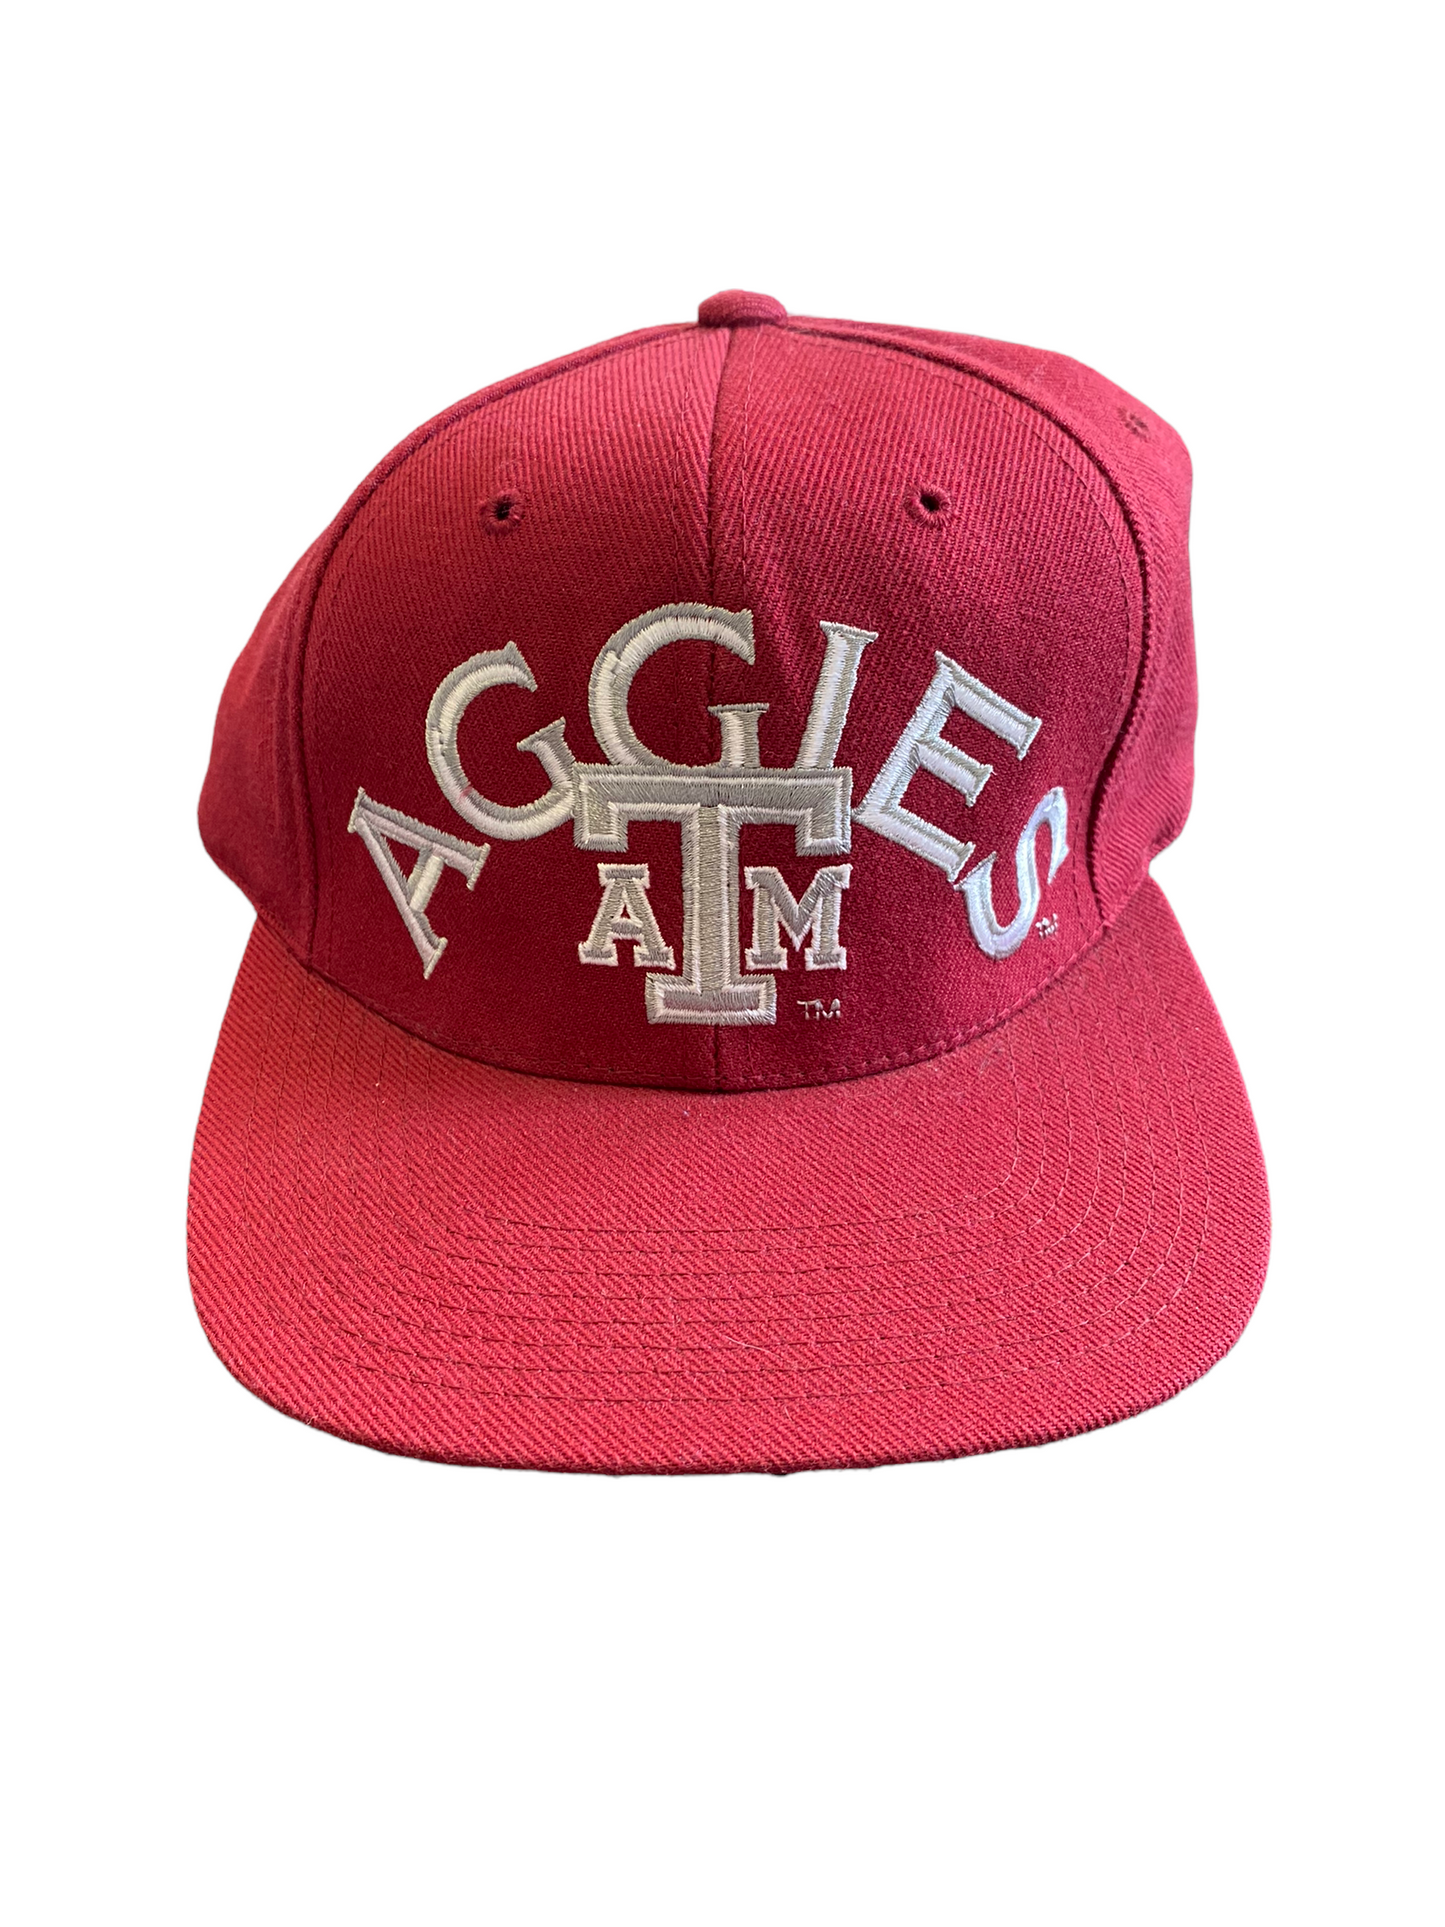 Vintage Texas A&M Fitted Hat NEW